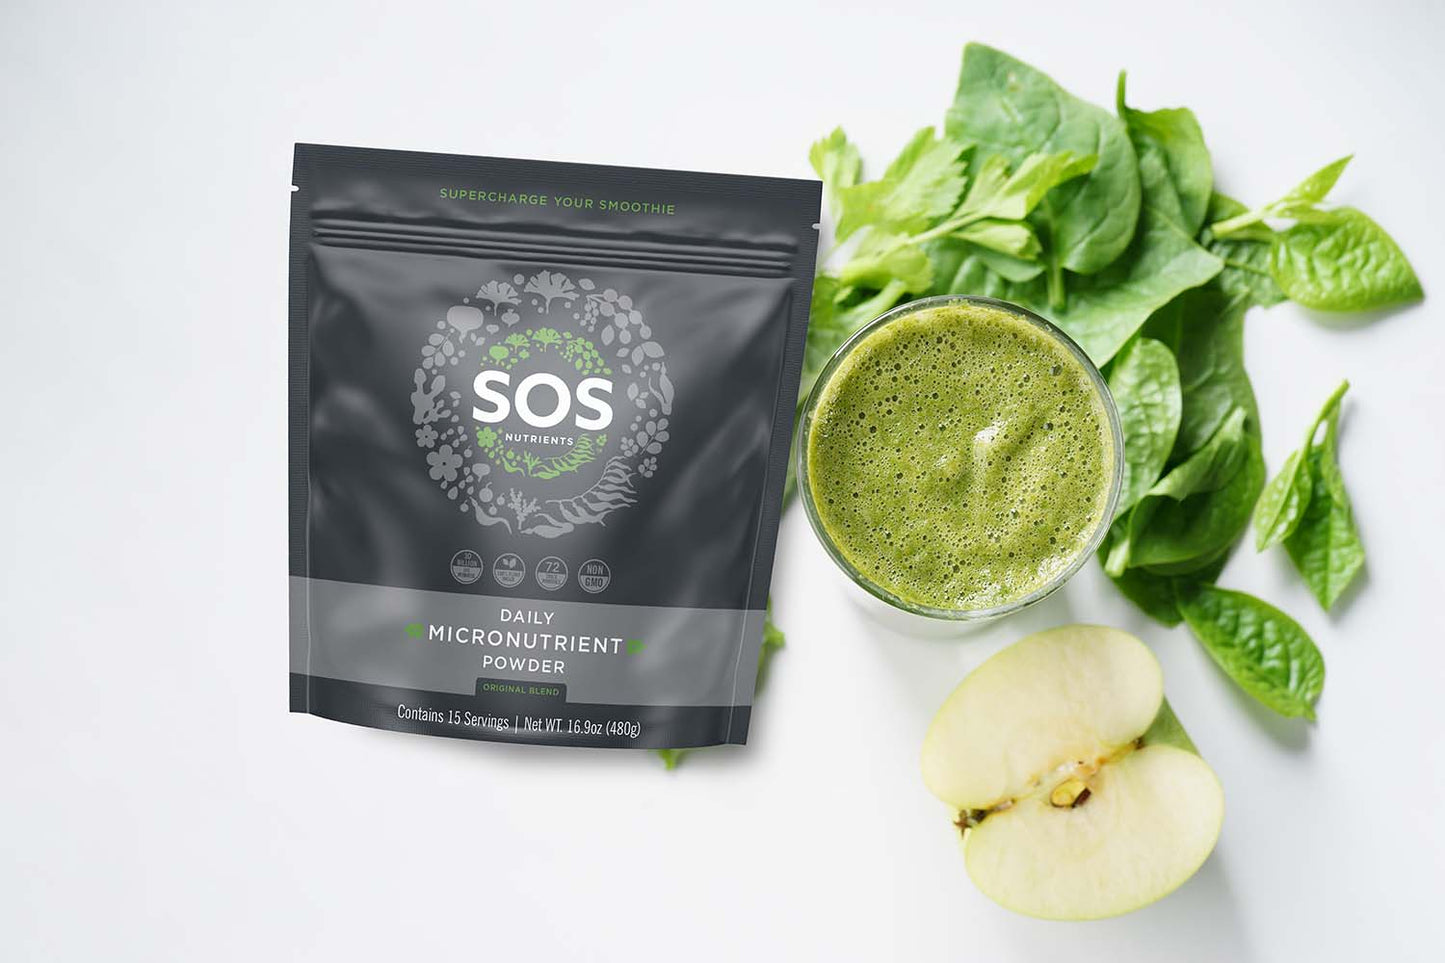 SOS Daily Micronutrient Powder Monthly Subscription